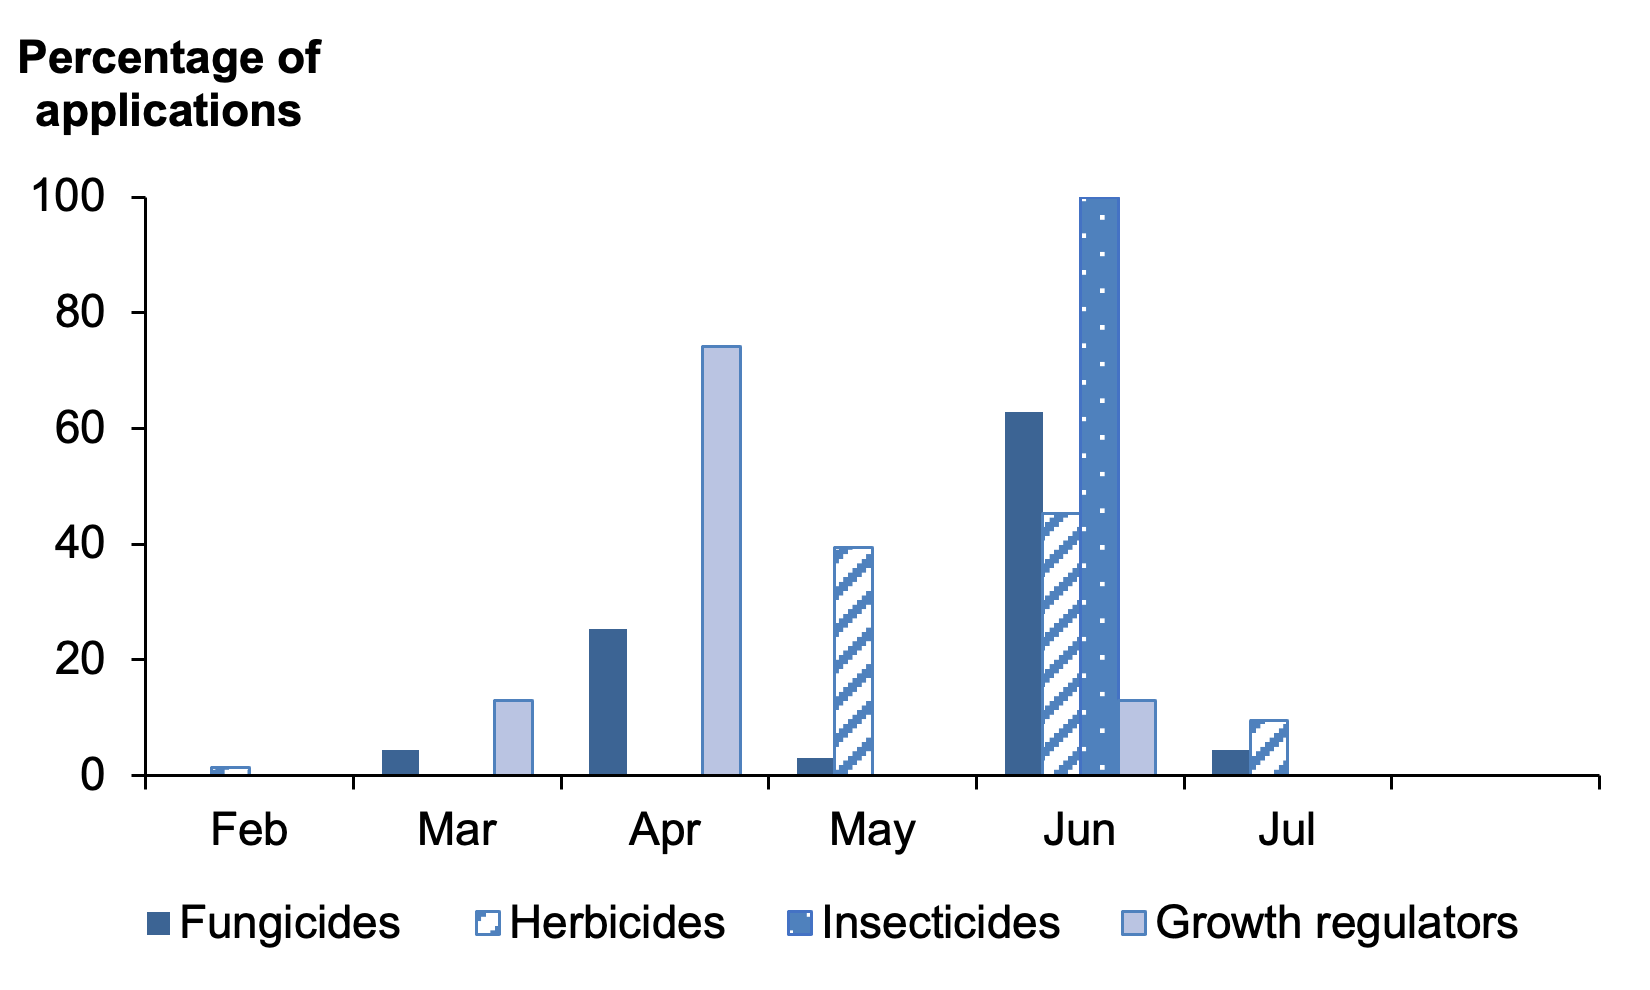 Bar chart of percentage of pesticide applications on arable silage by month where most applications are in June 2021.